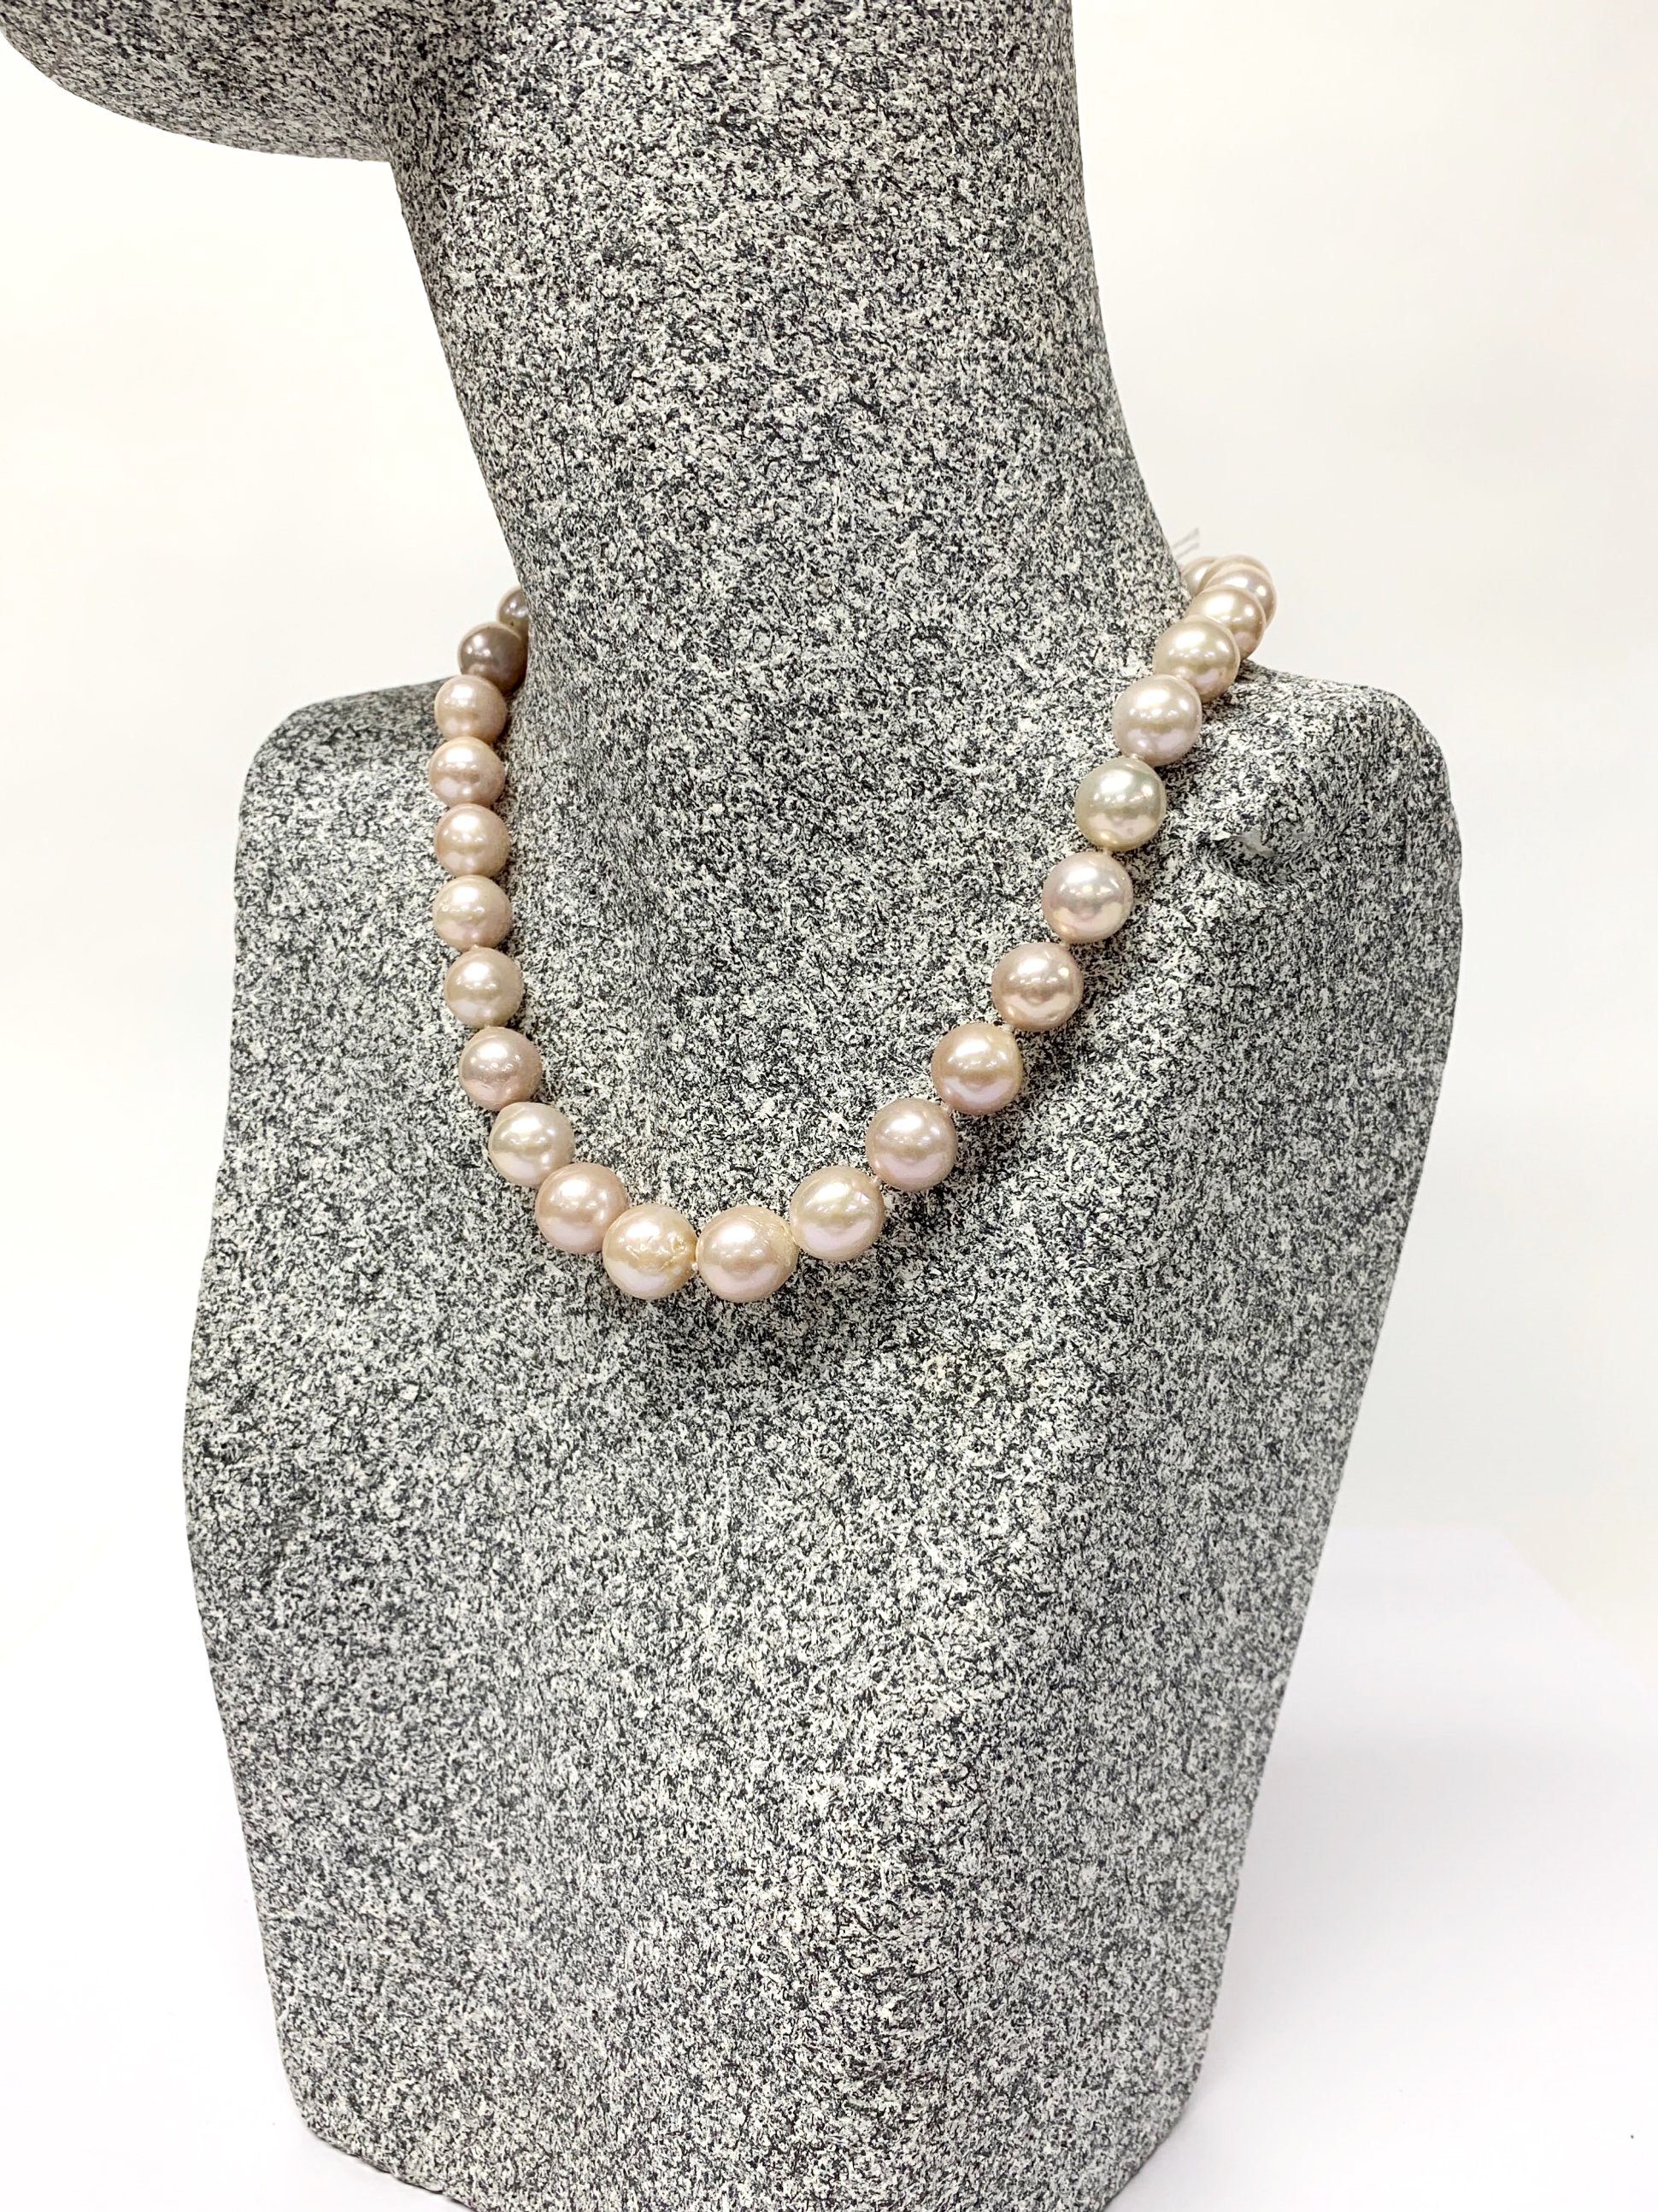 A lovely single strand necklace of lustrous large 12mm cultured pearls, necklace L. 40cm.